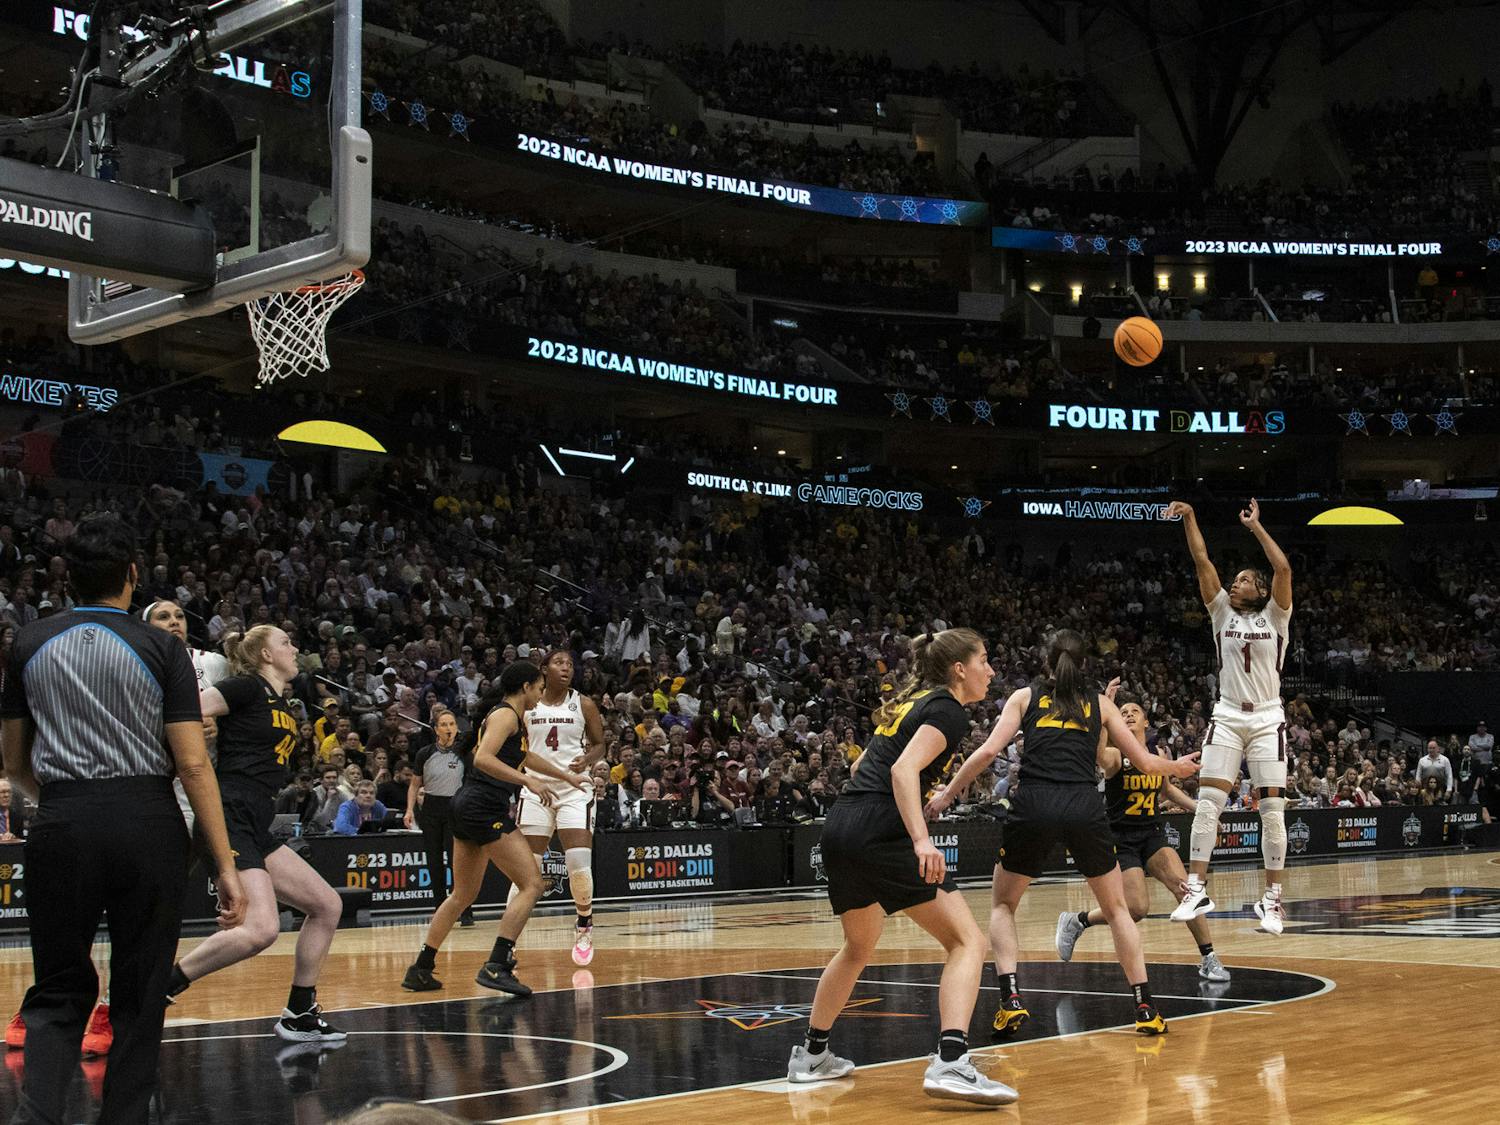 The Women’s 2023 Final Four game saw an intense matchup between the University of South Carolina Gamecocks and the University of Iowa at the American Airlines Center in Dallas, Texas, on March 31, 2023. Iowa held the lead throughout the majority of the game. In the end, the Gamecocks lost against the Hawkeyes 77-73, snapping its 42 win streak.